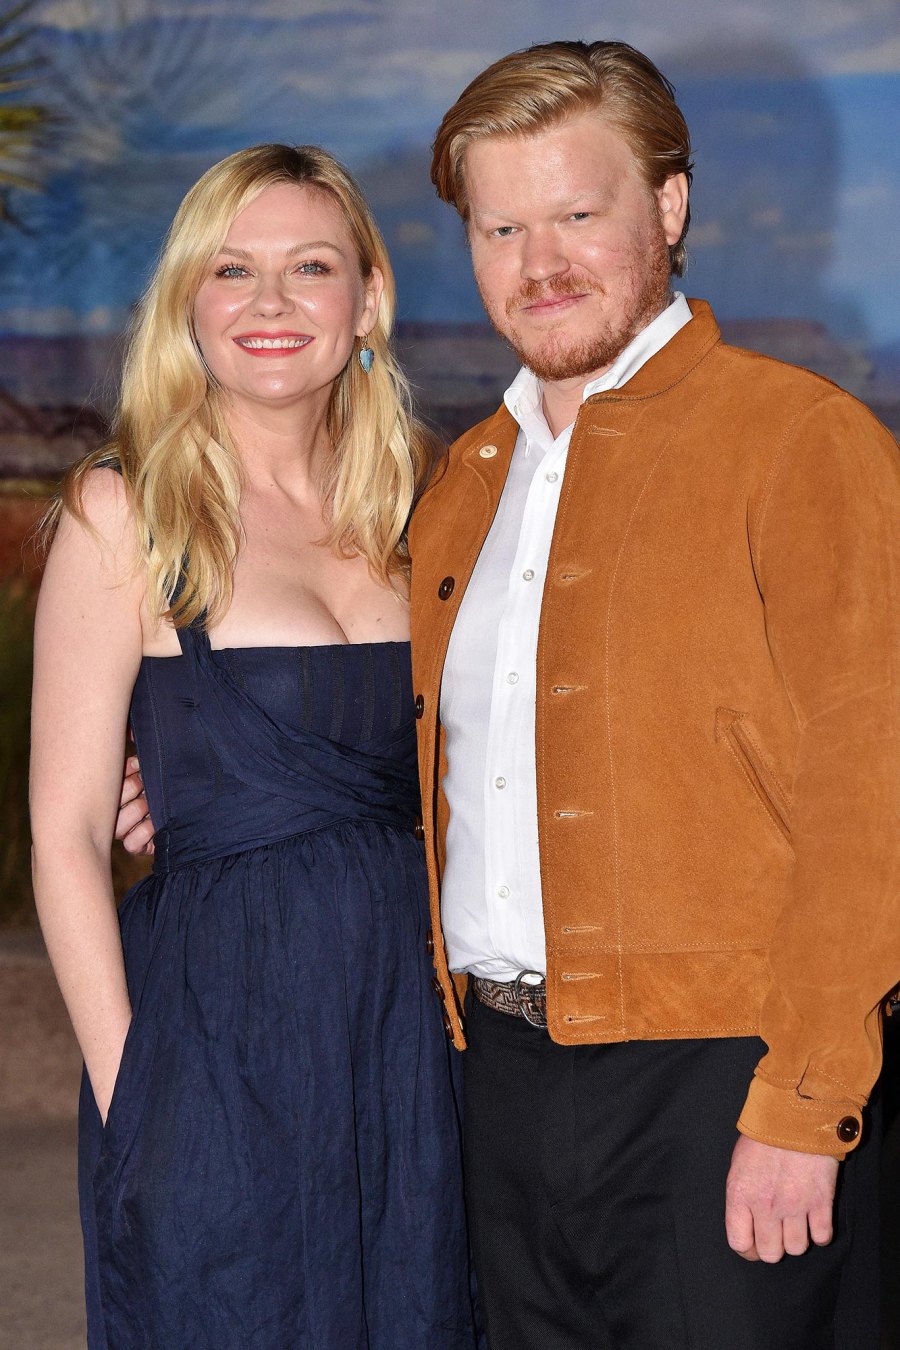 June 2020 Everything Kirsten Dunst and Jesse Plemons Have Said About Parenting